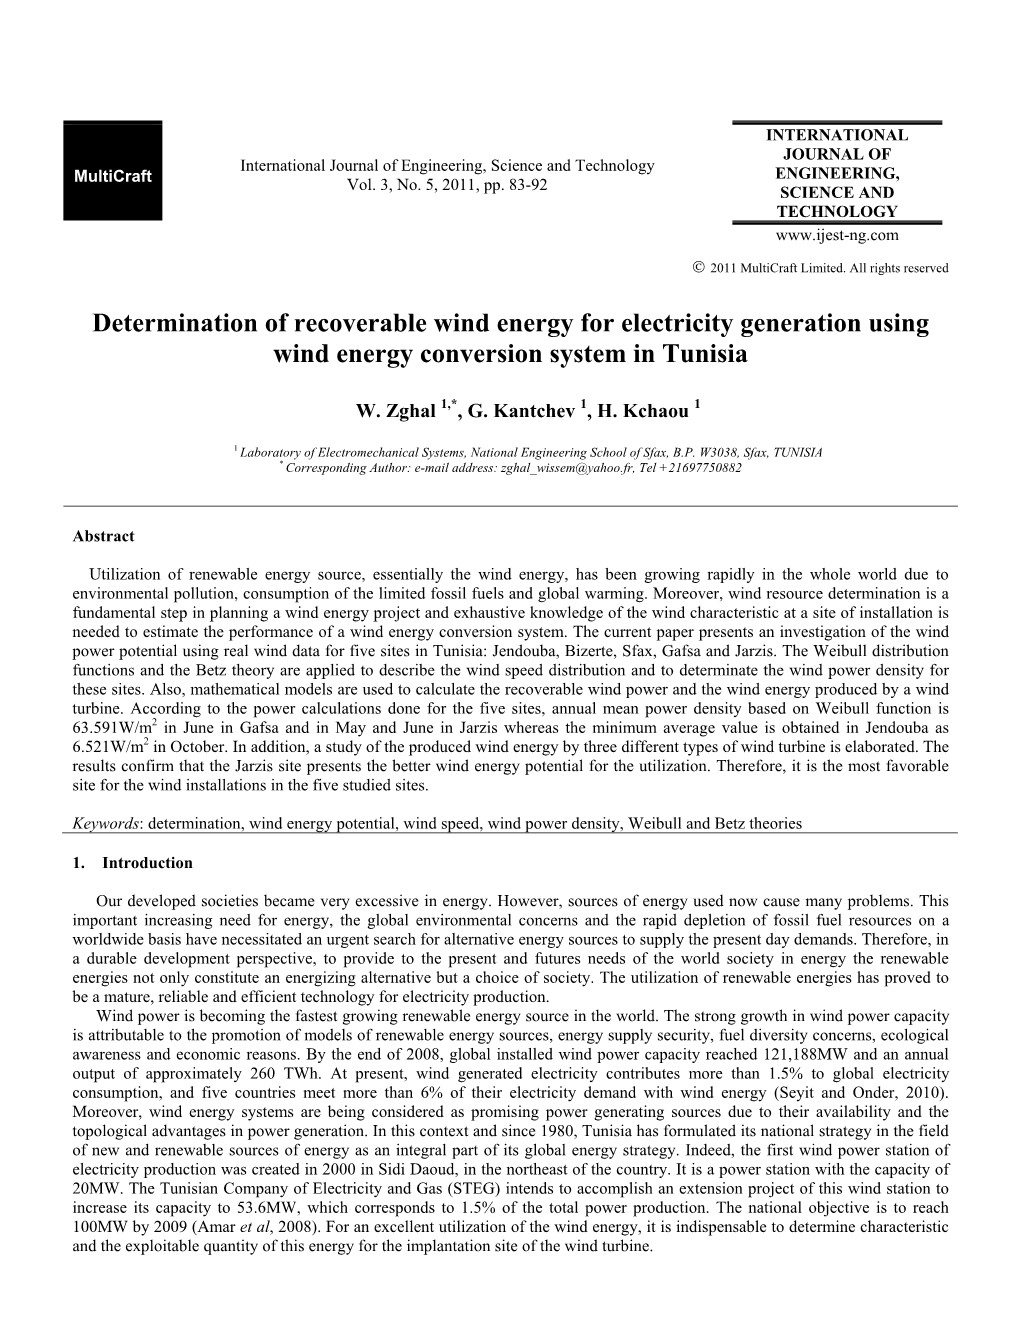 Determination of Recoverable Wind Energy for Electricity Generation Using Wind Energy Conversion System in Tunisia